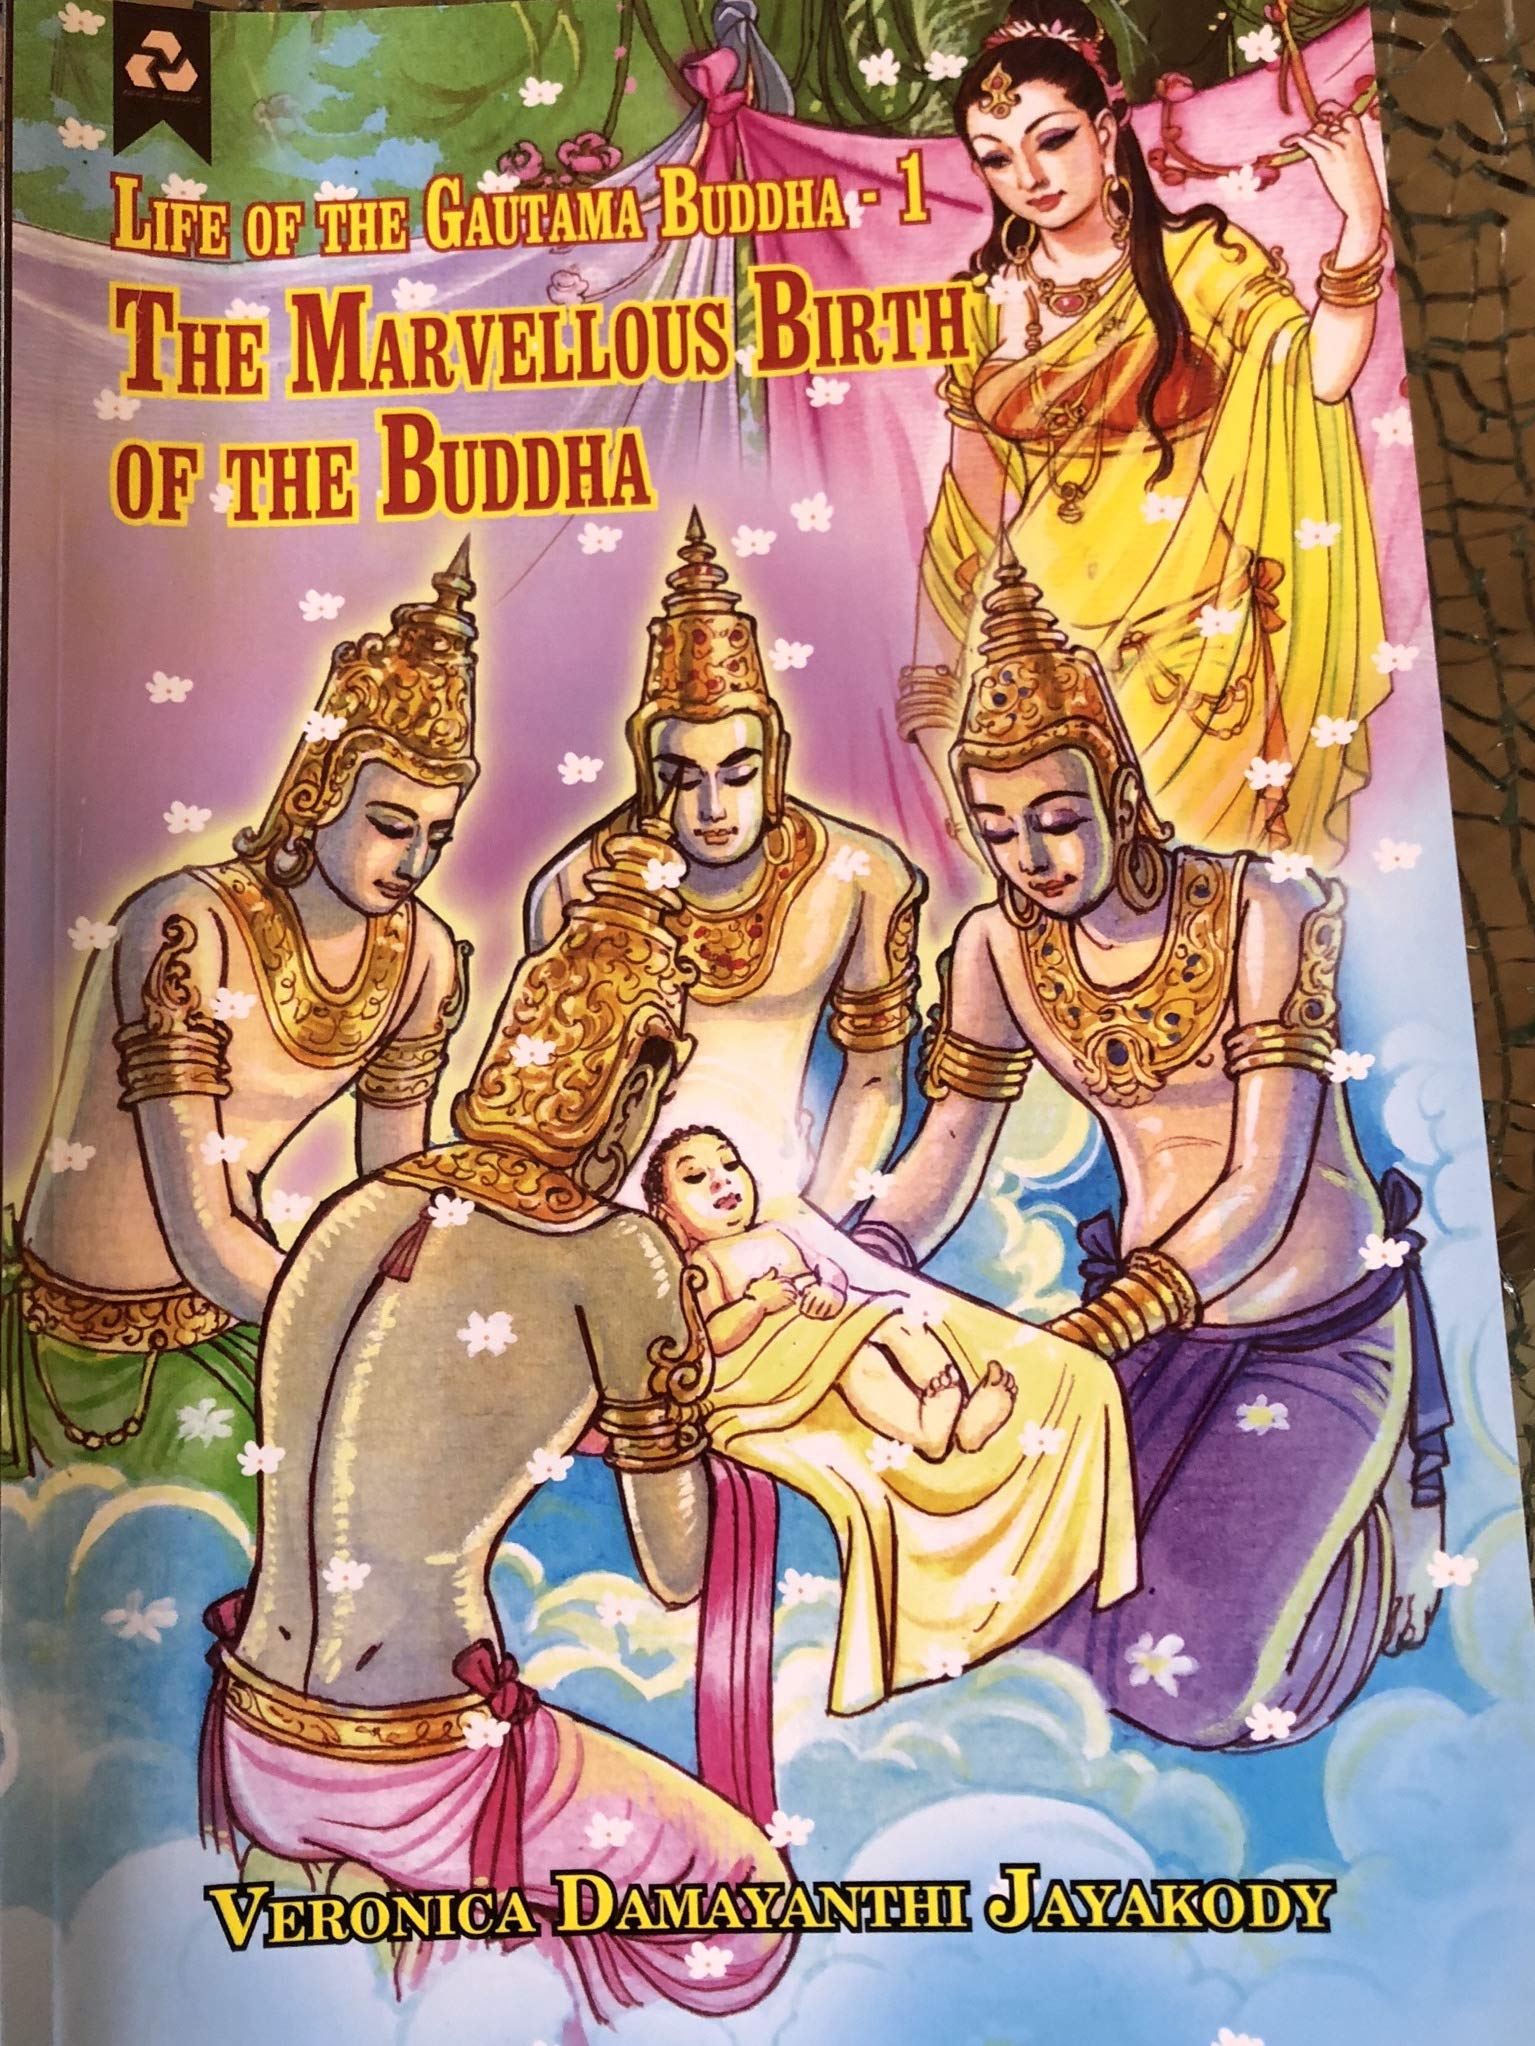 The Marvellous Birth of the Buddha